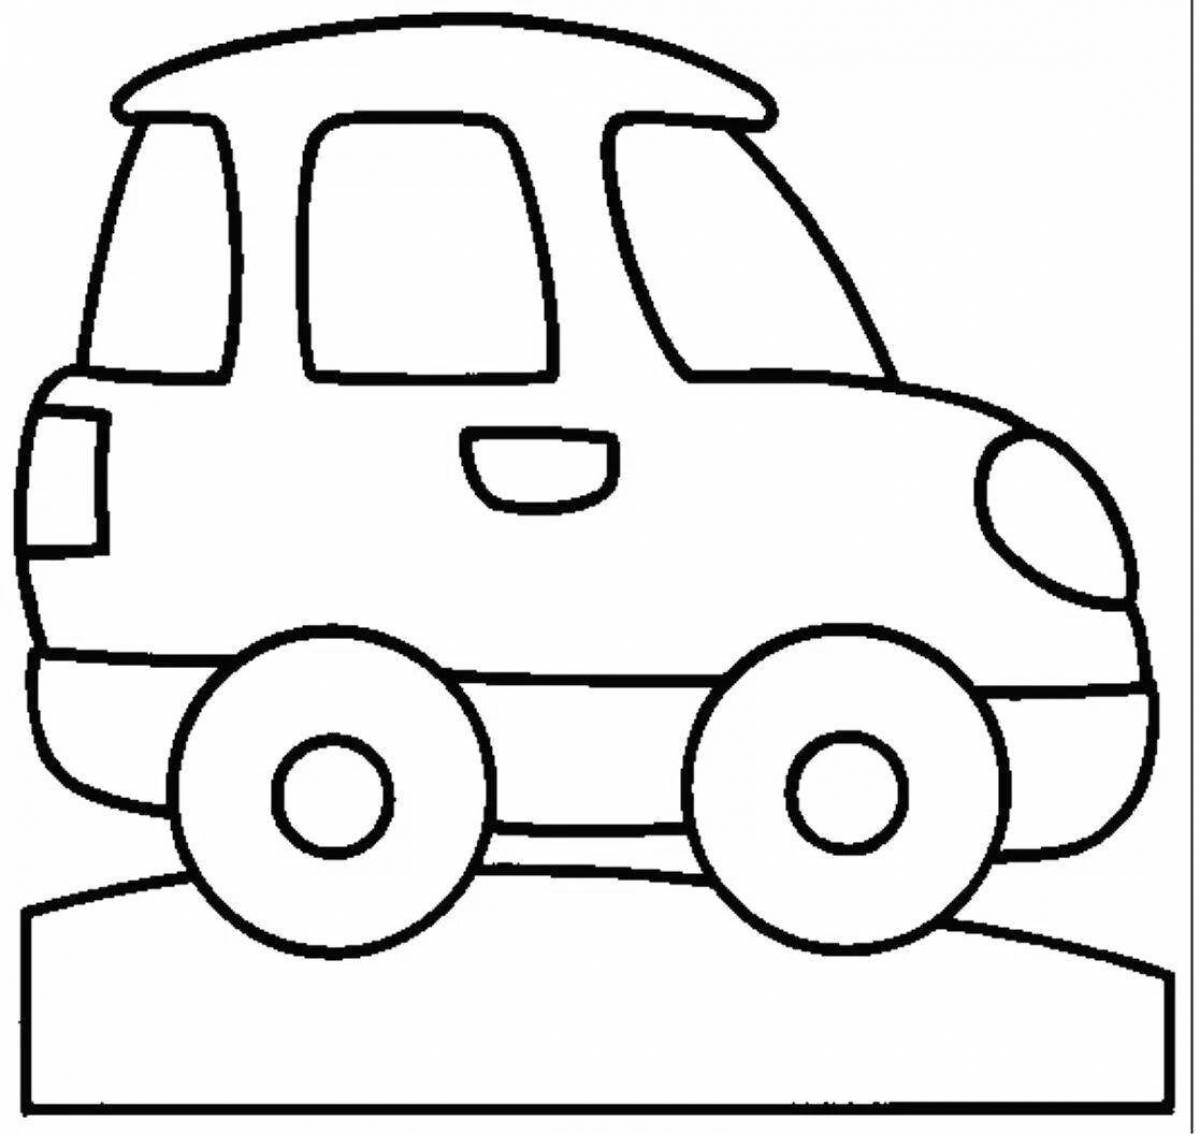 Crazy cars coloring page for 2 year olds